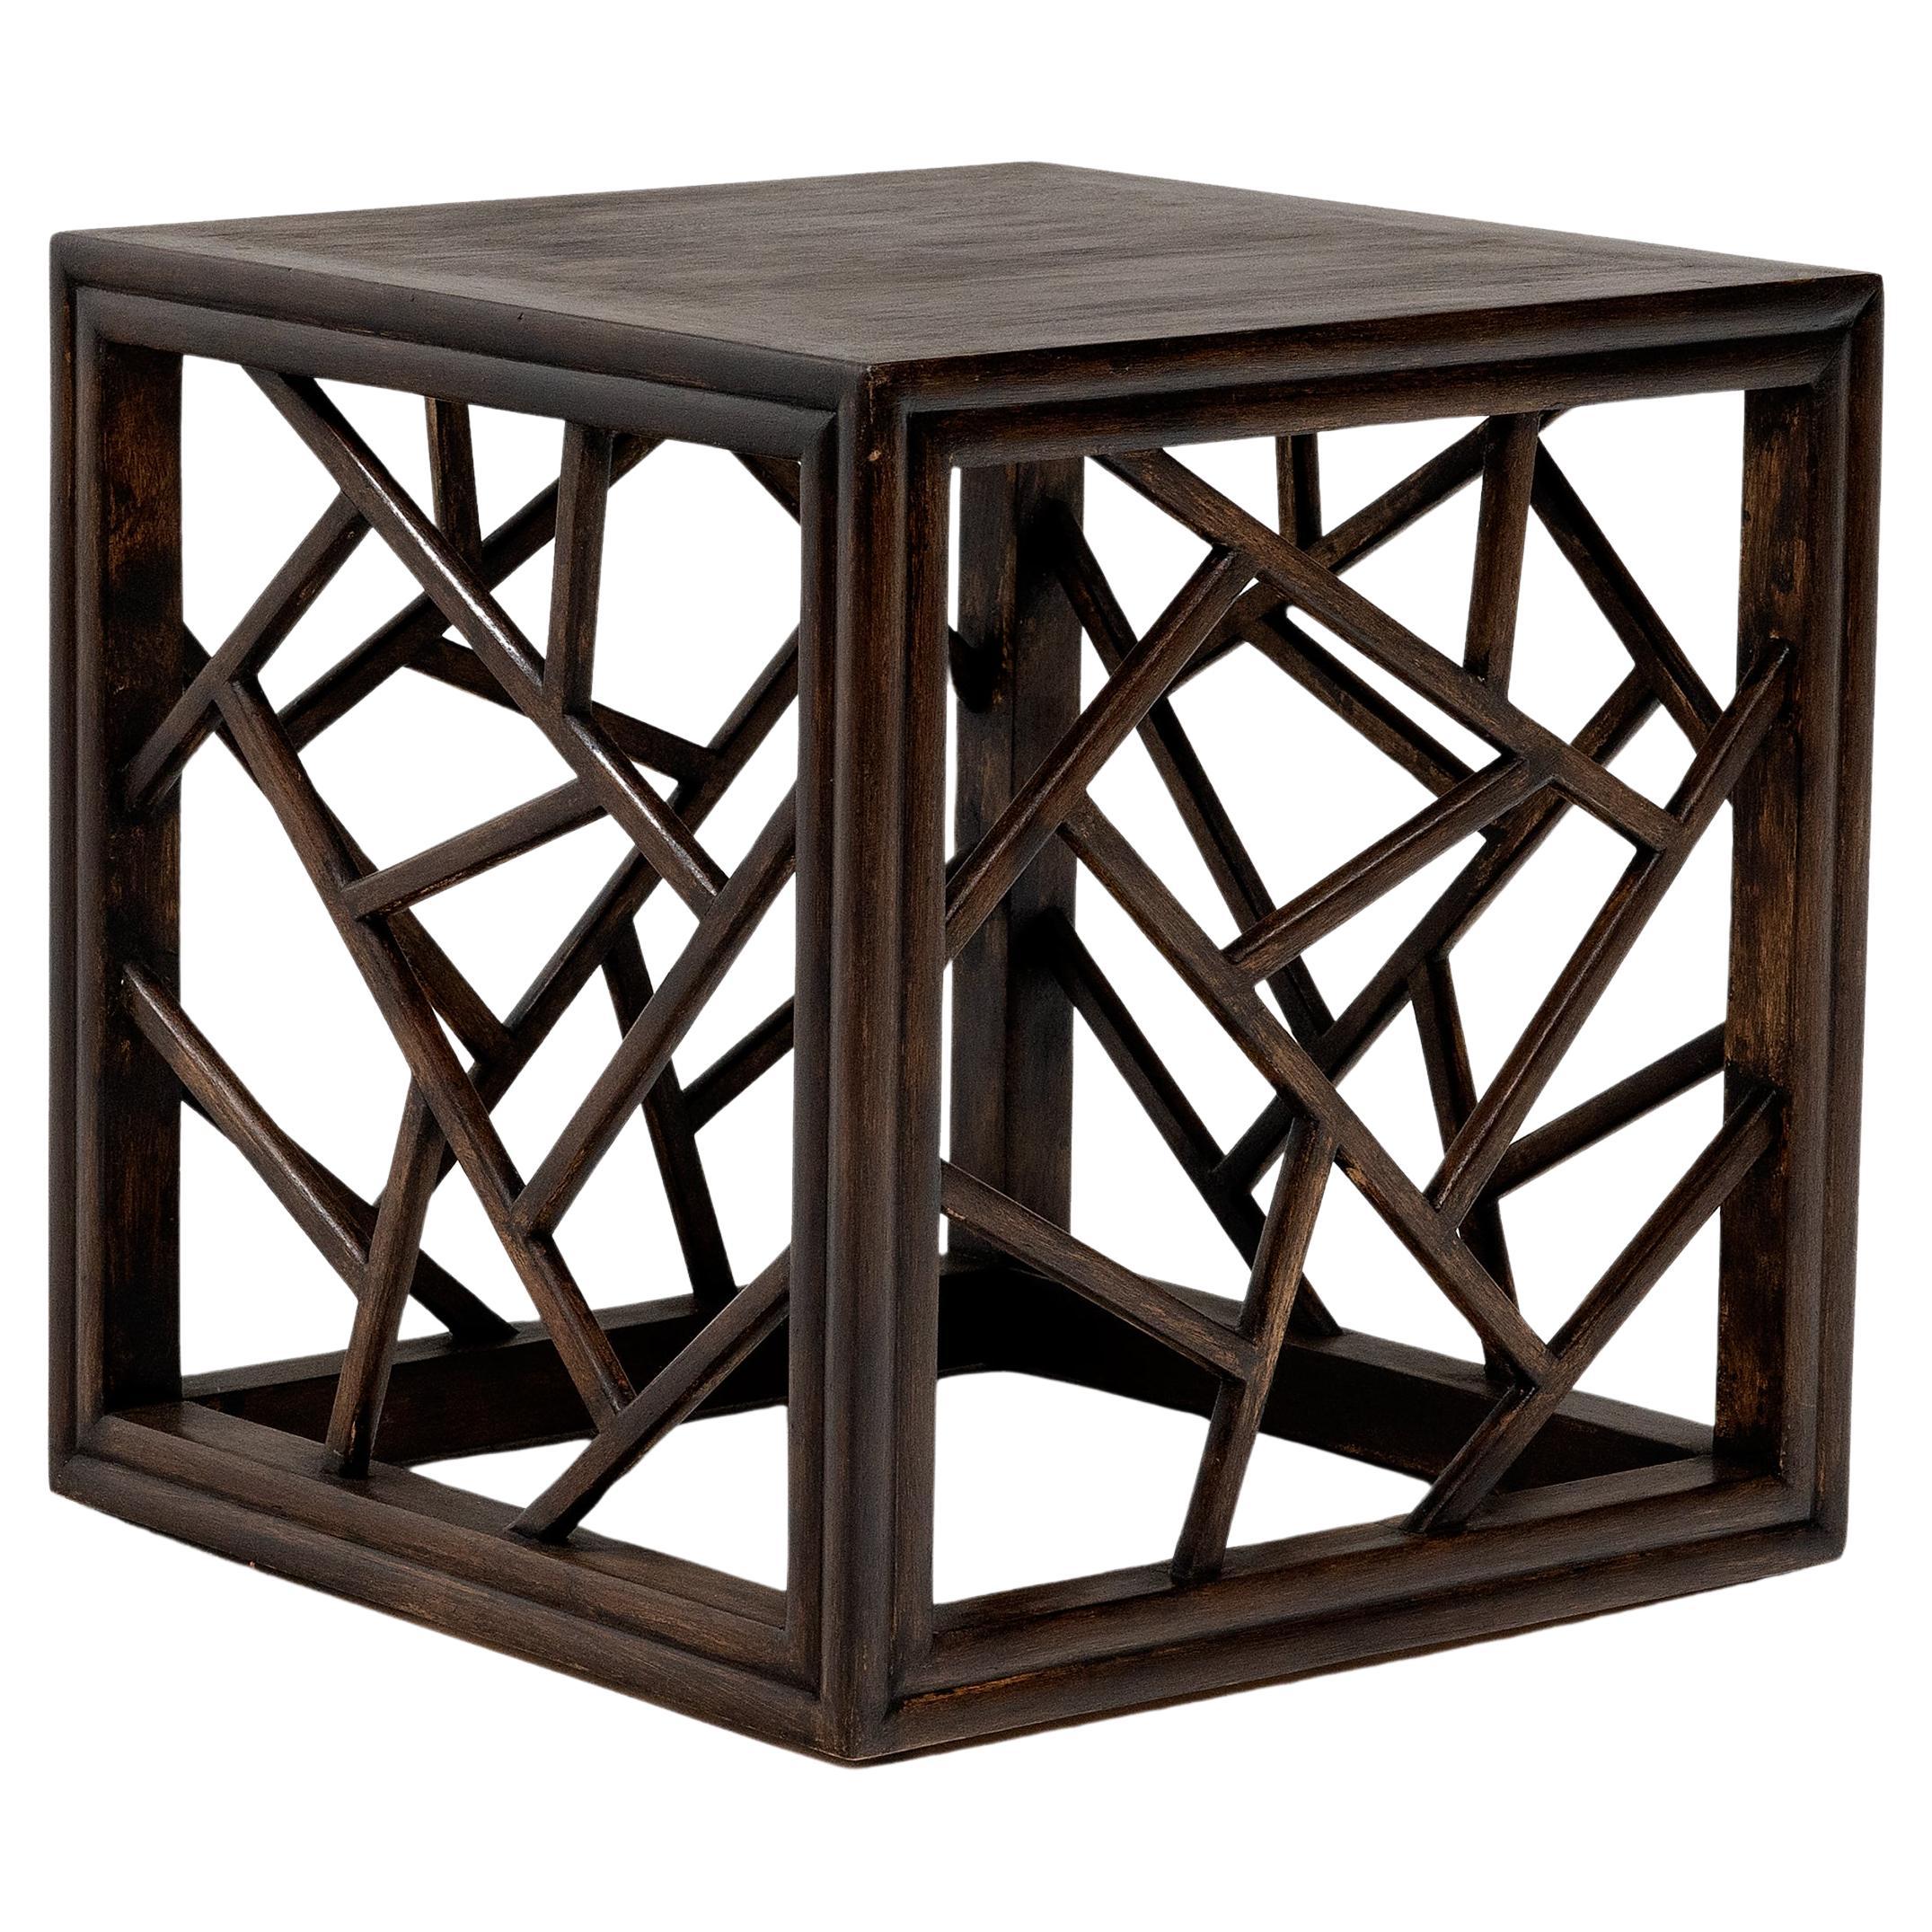 Chinese Cracked Ice Square Table, c. 1900